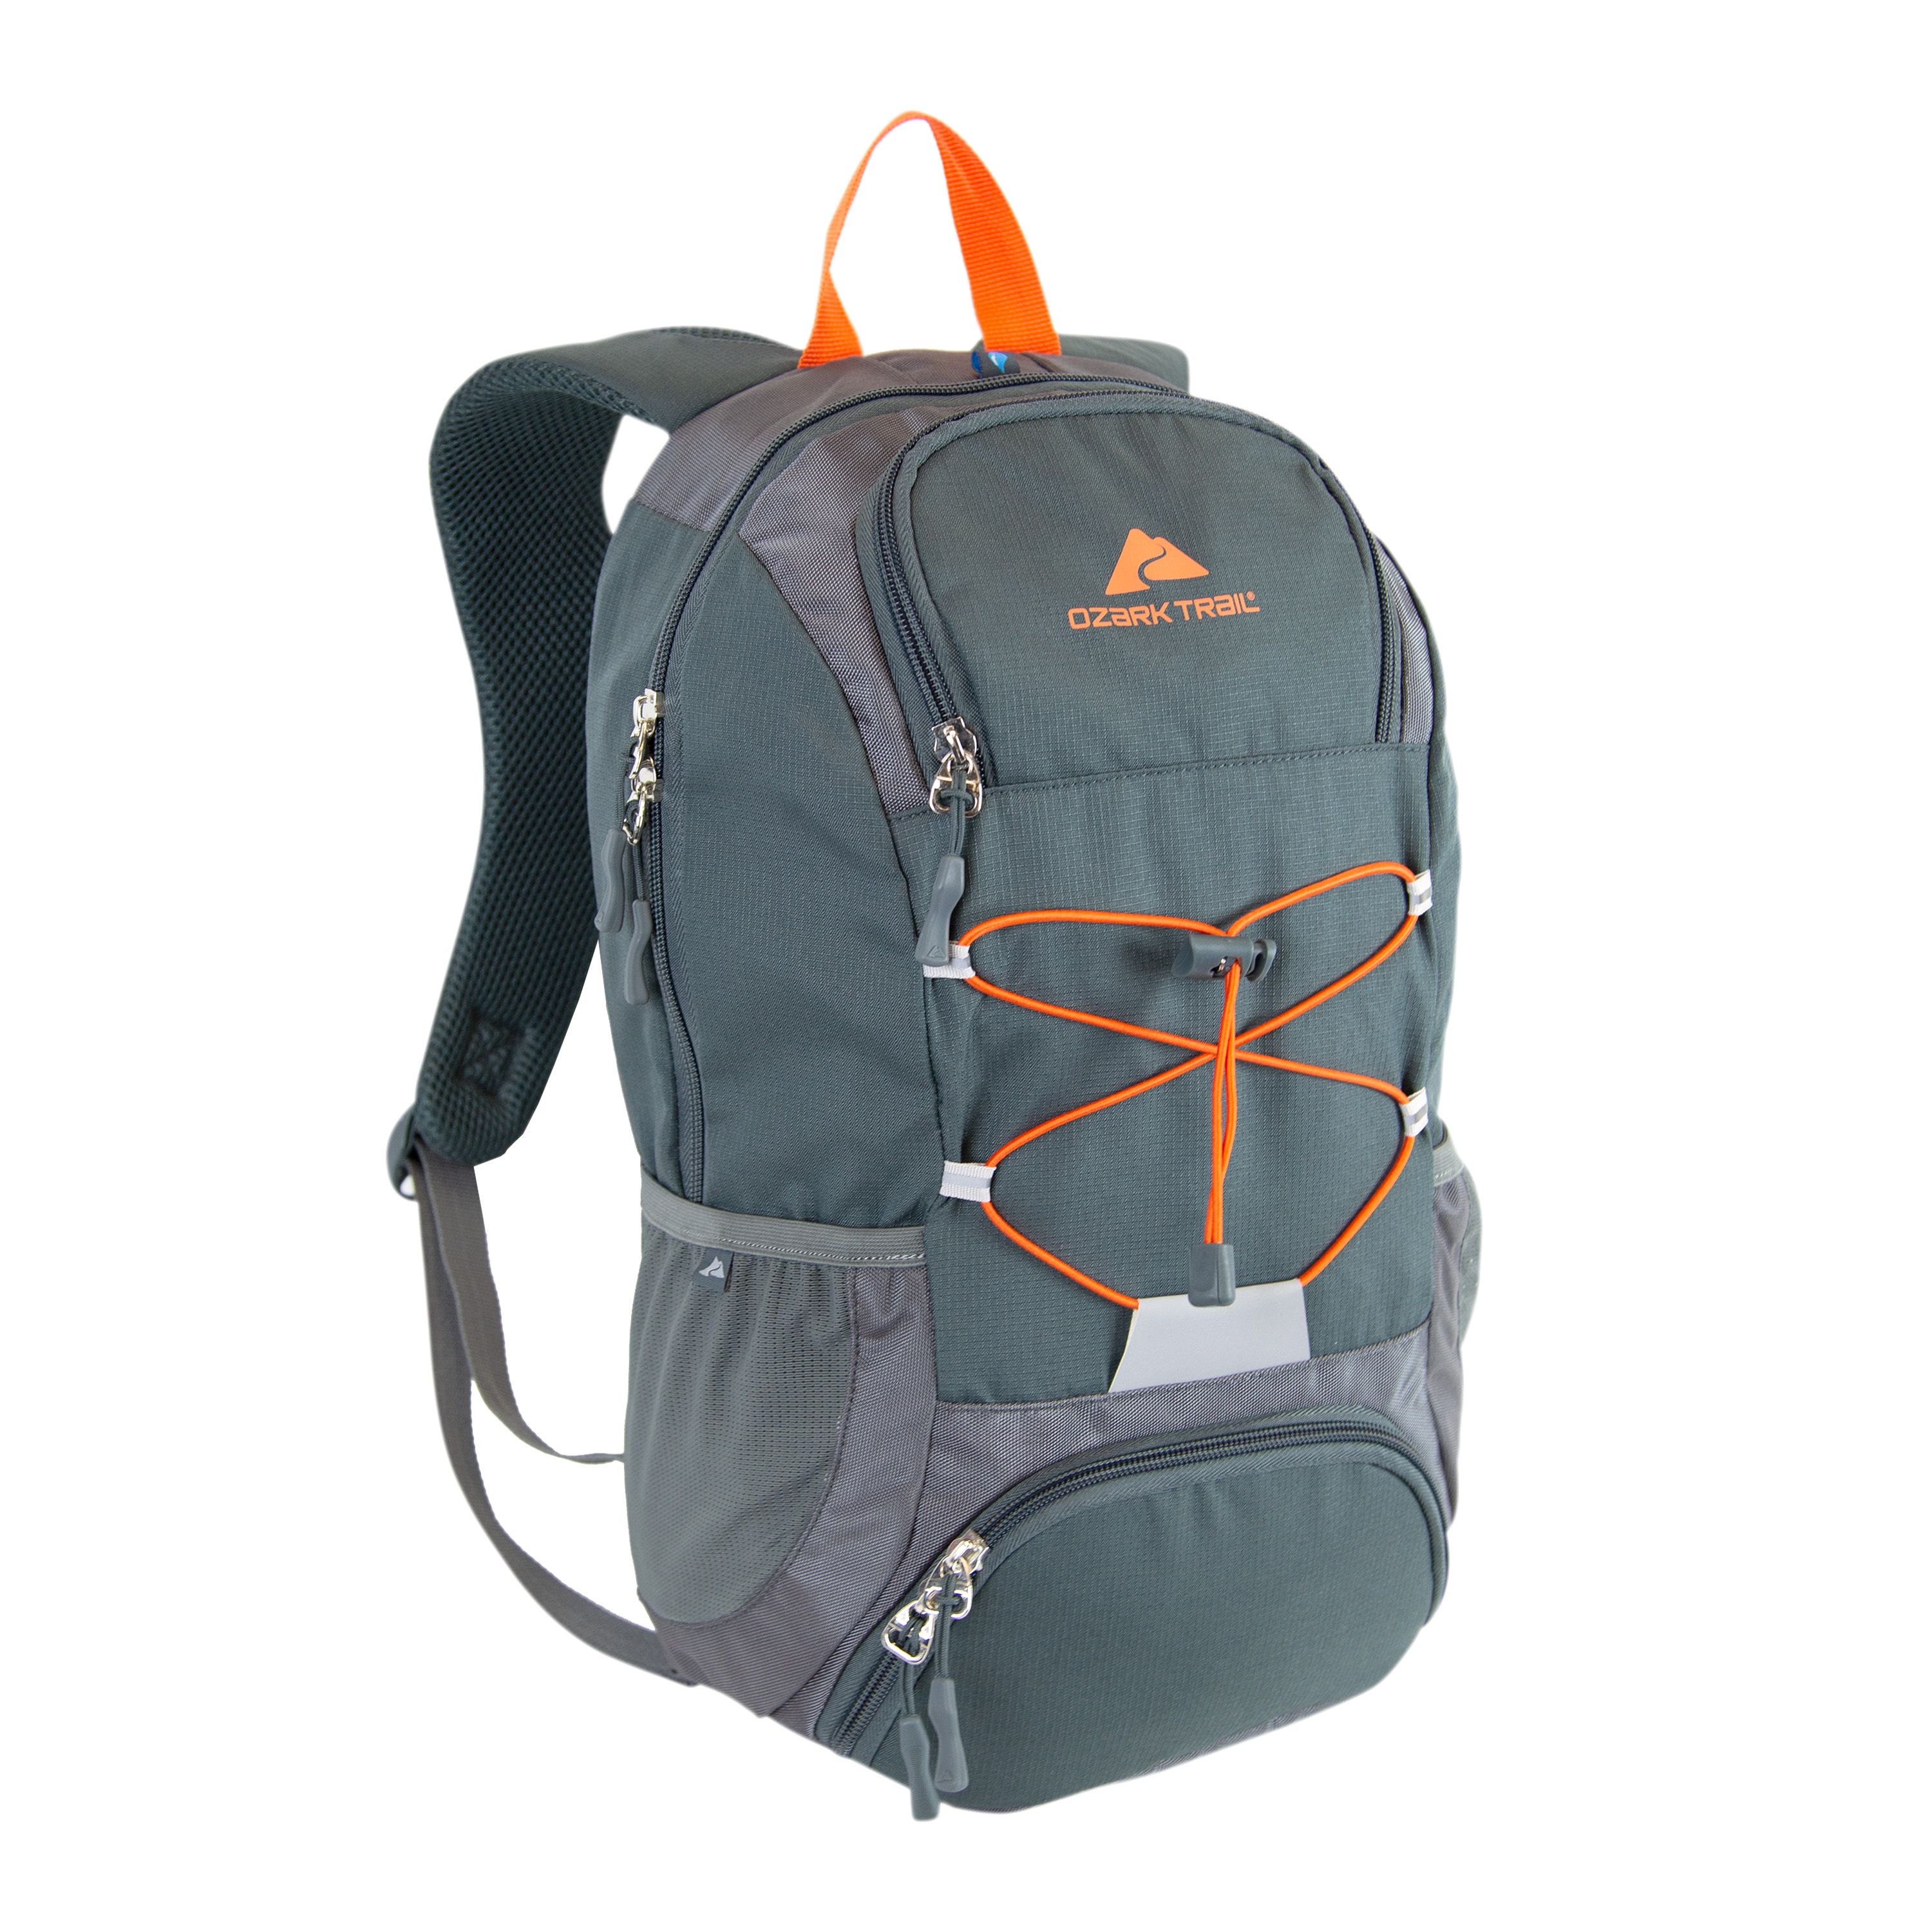 Ozark Trail 20L Thomas Hollow Backpack with Insulated Cooler Pocket, Gray, Solid Pattern - image 1 of 9